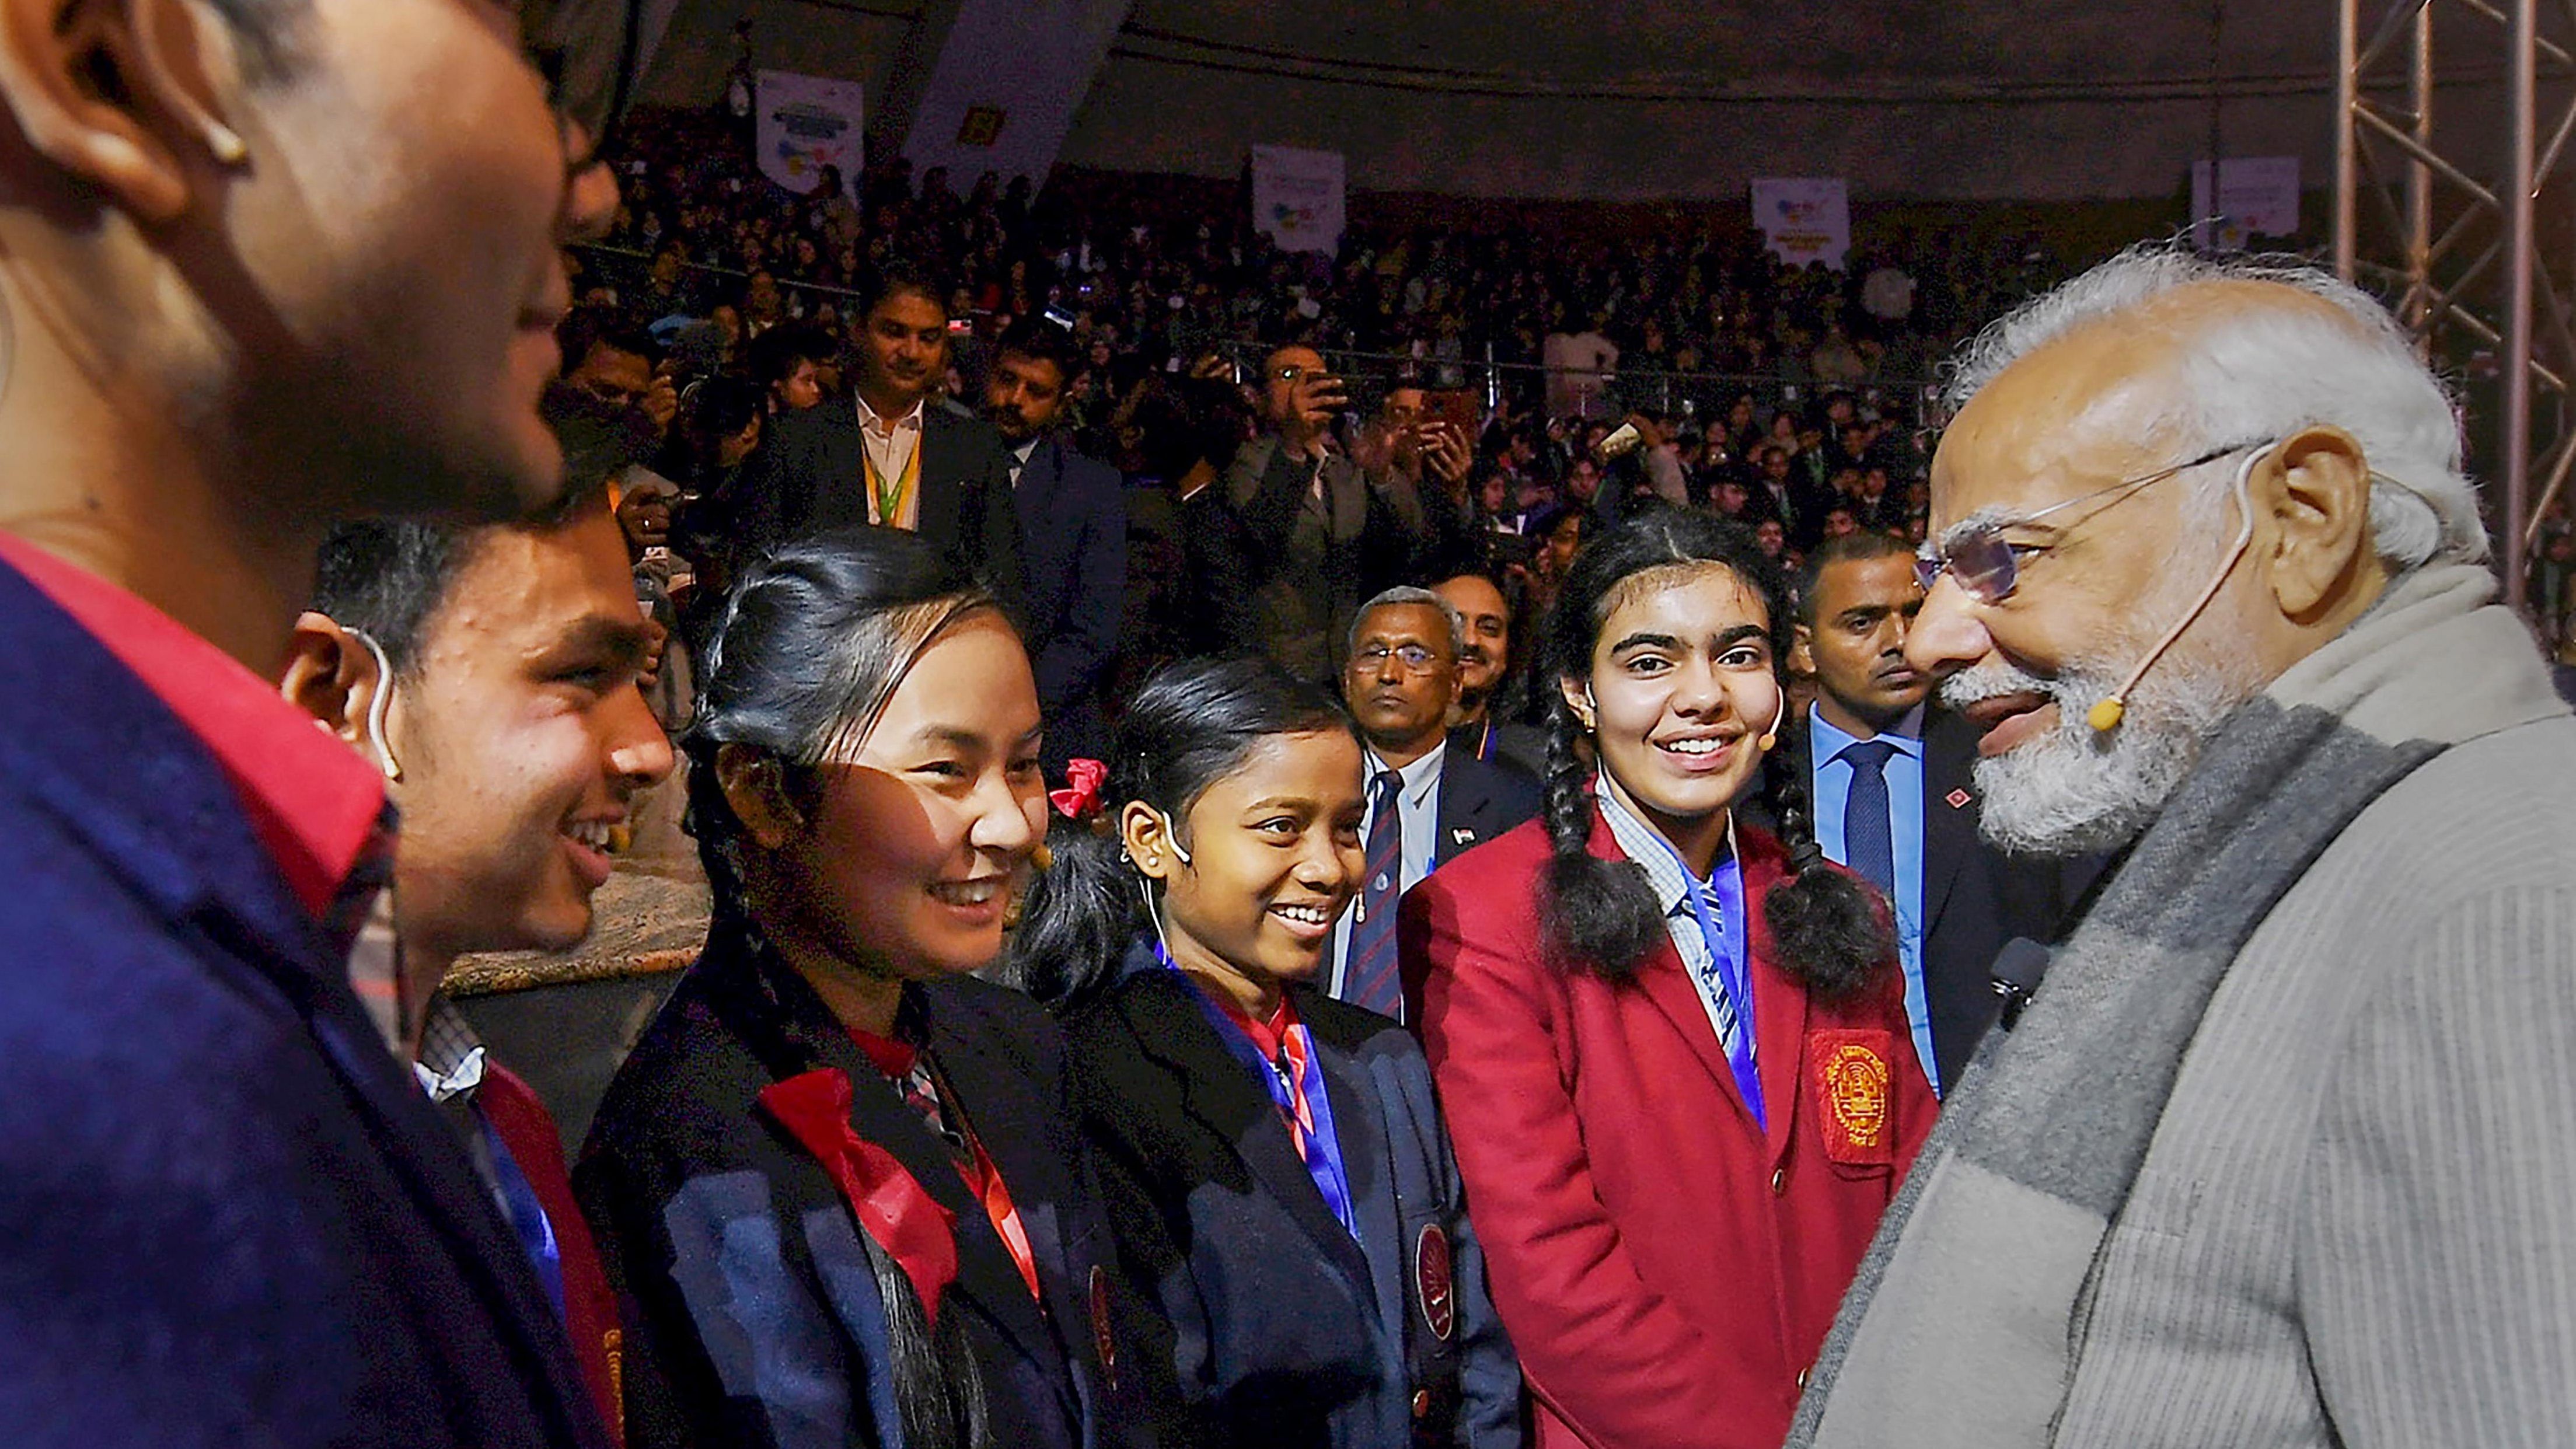 'Pariksha Pe Charcha' is an annual event where Modi interacts with students appearing in board examinations. Credit: PTI Photo